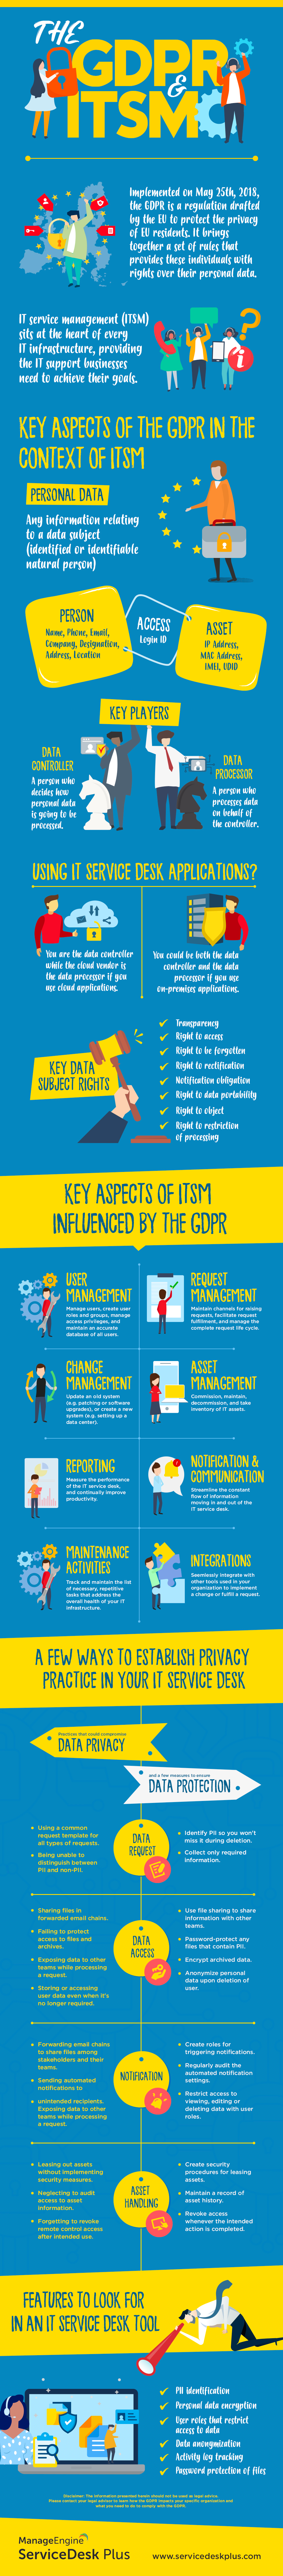 Gdpr Infographic Gdpr Compliance Infographic Manageengine